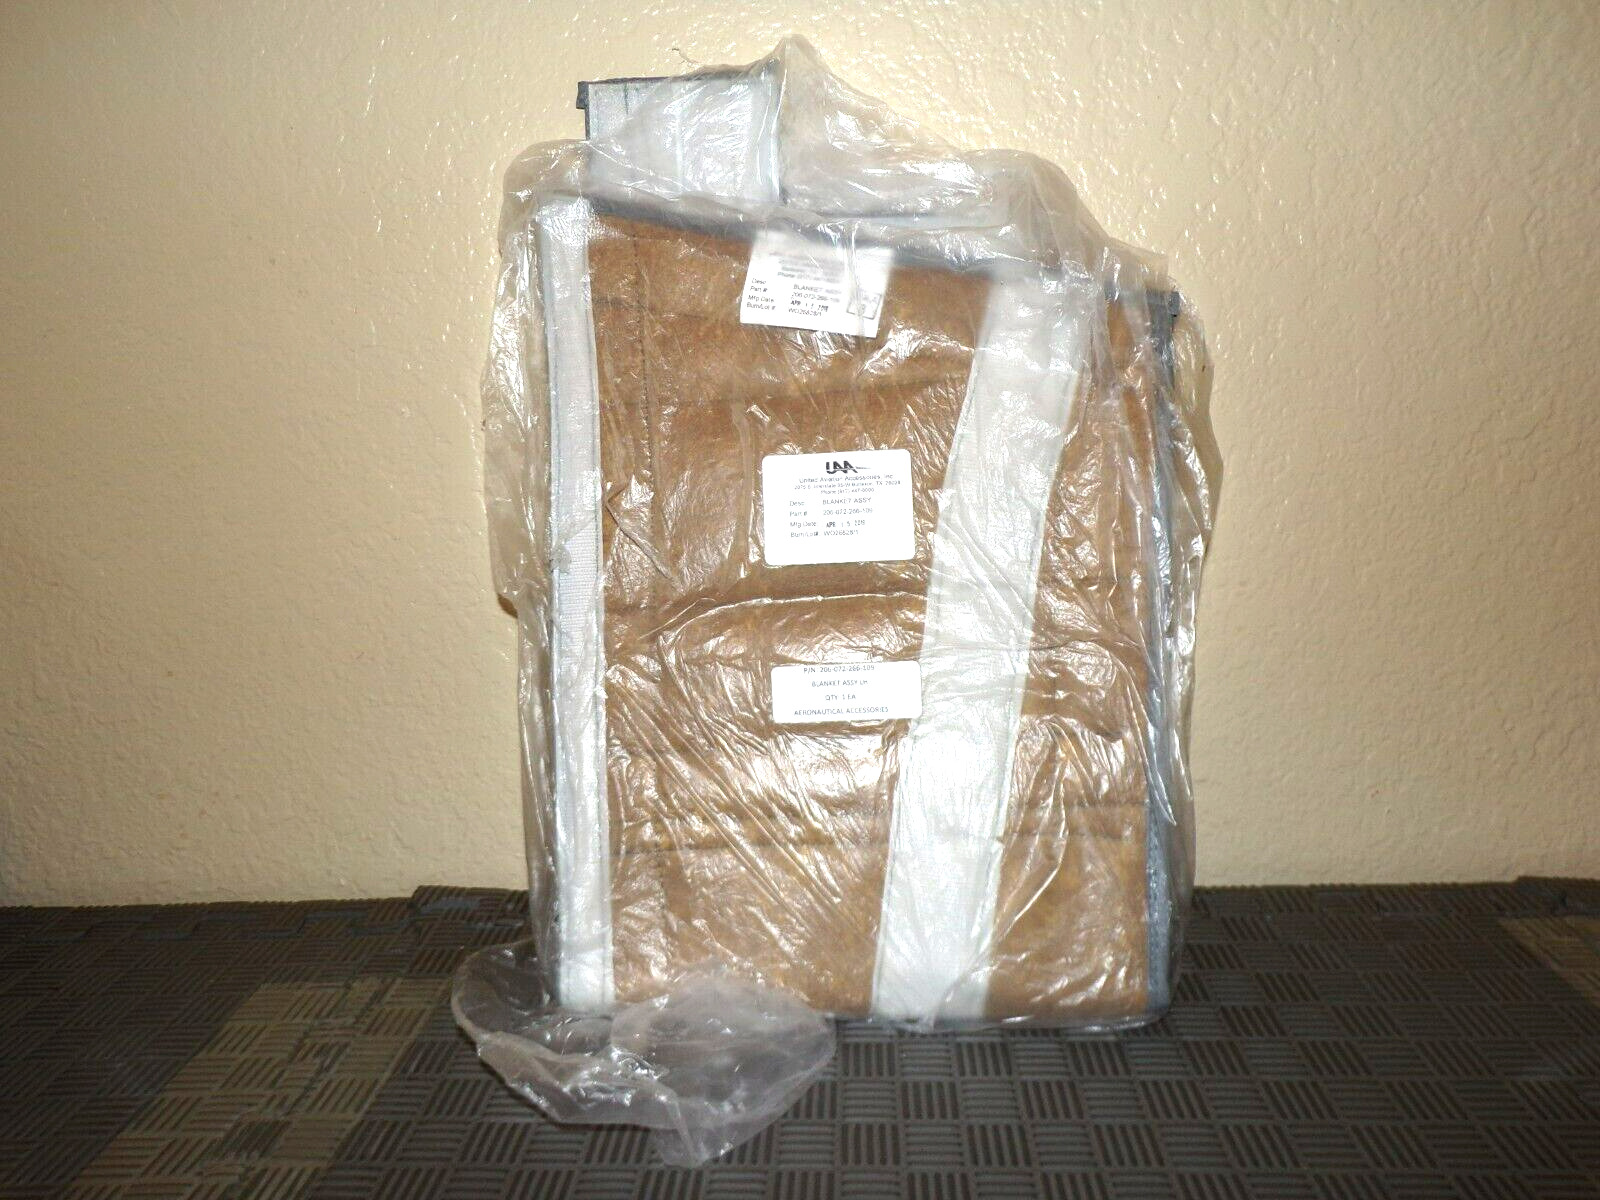 Bell 206 Helicopter Blanket 206-072-266-109